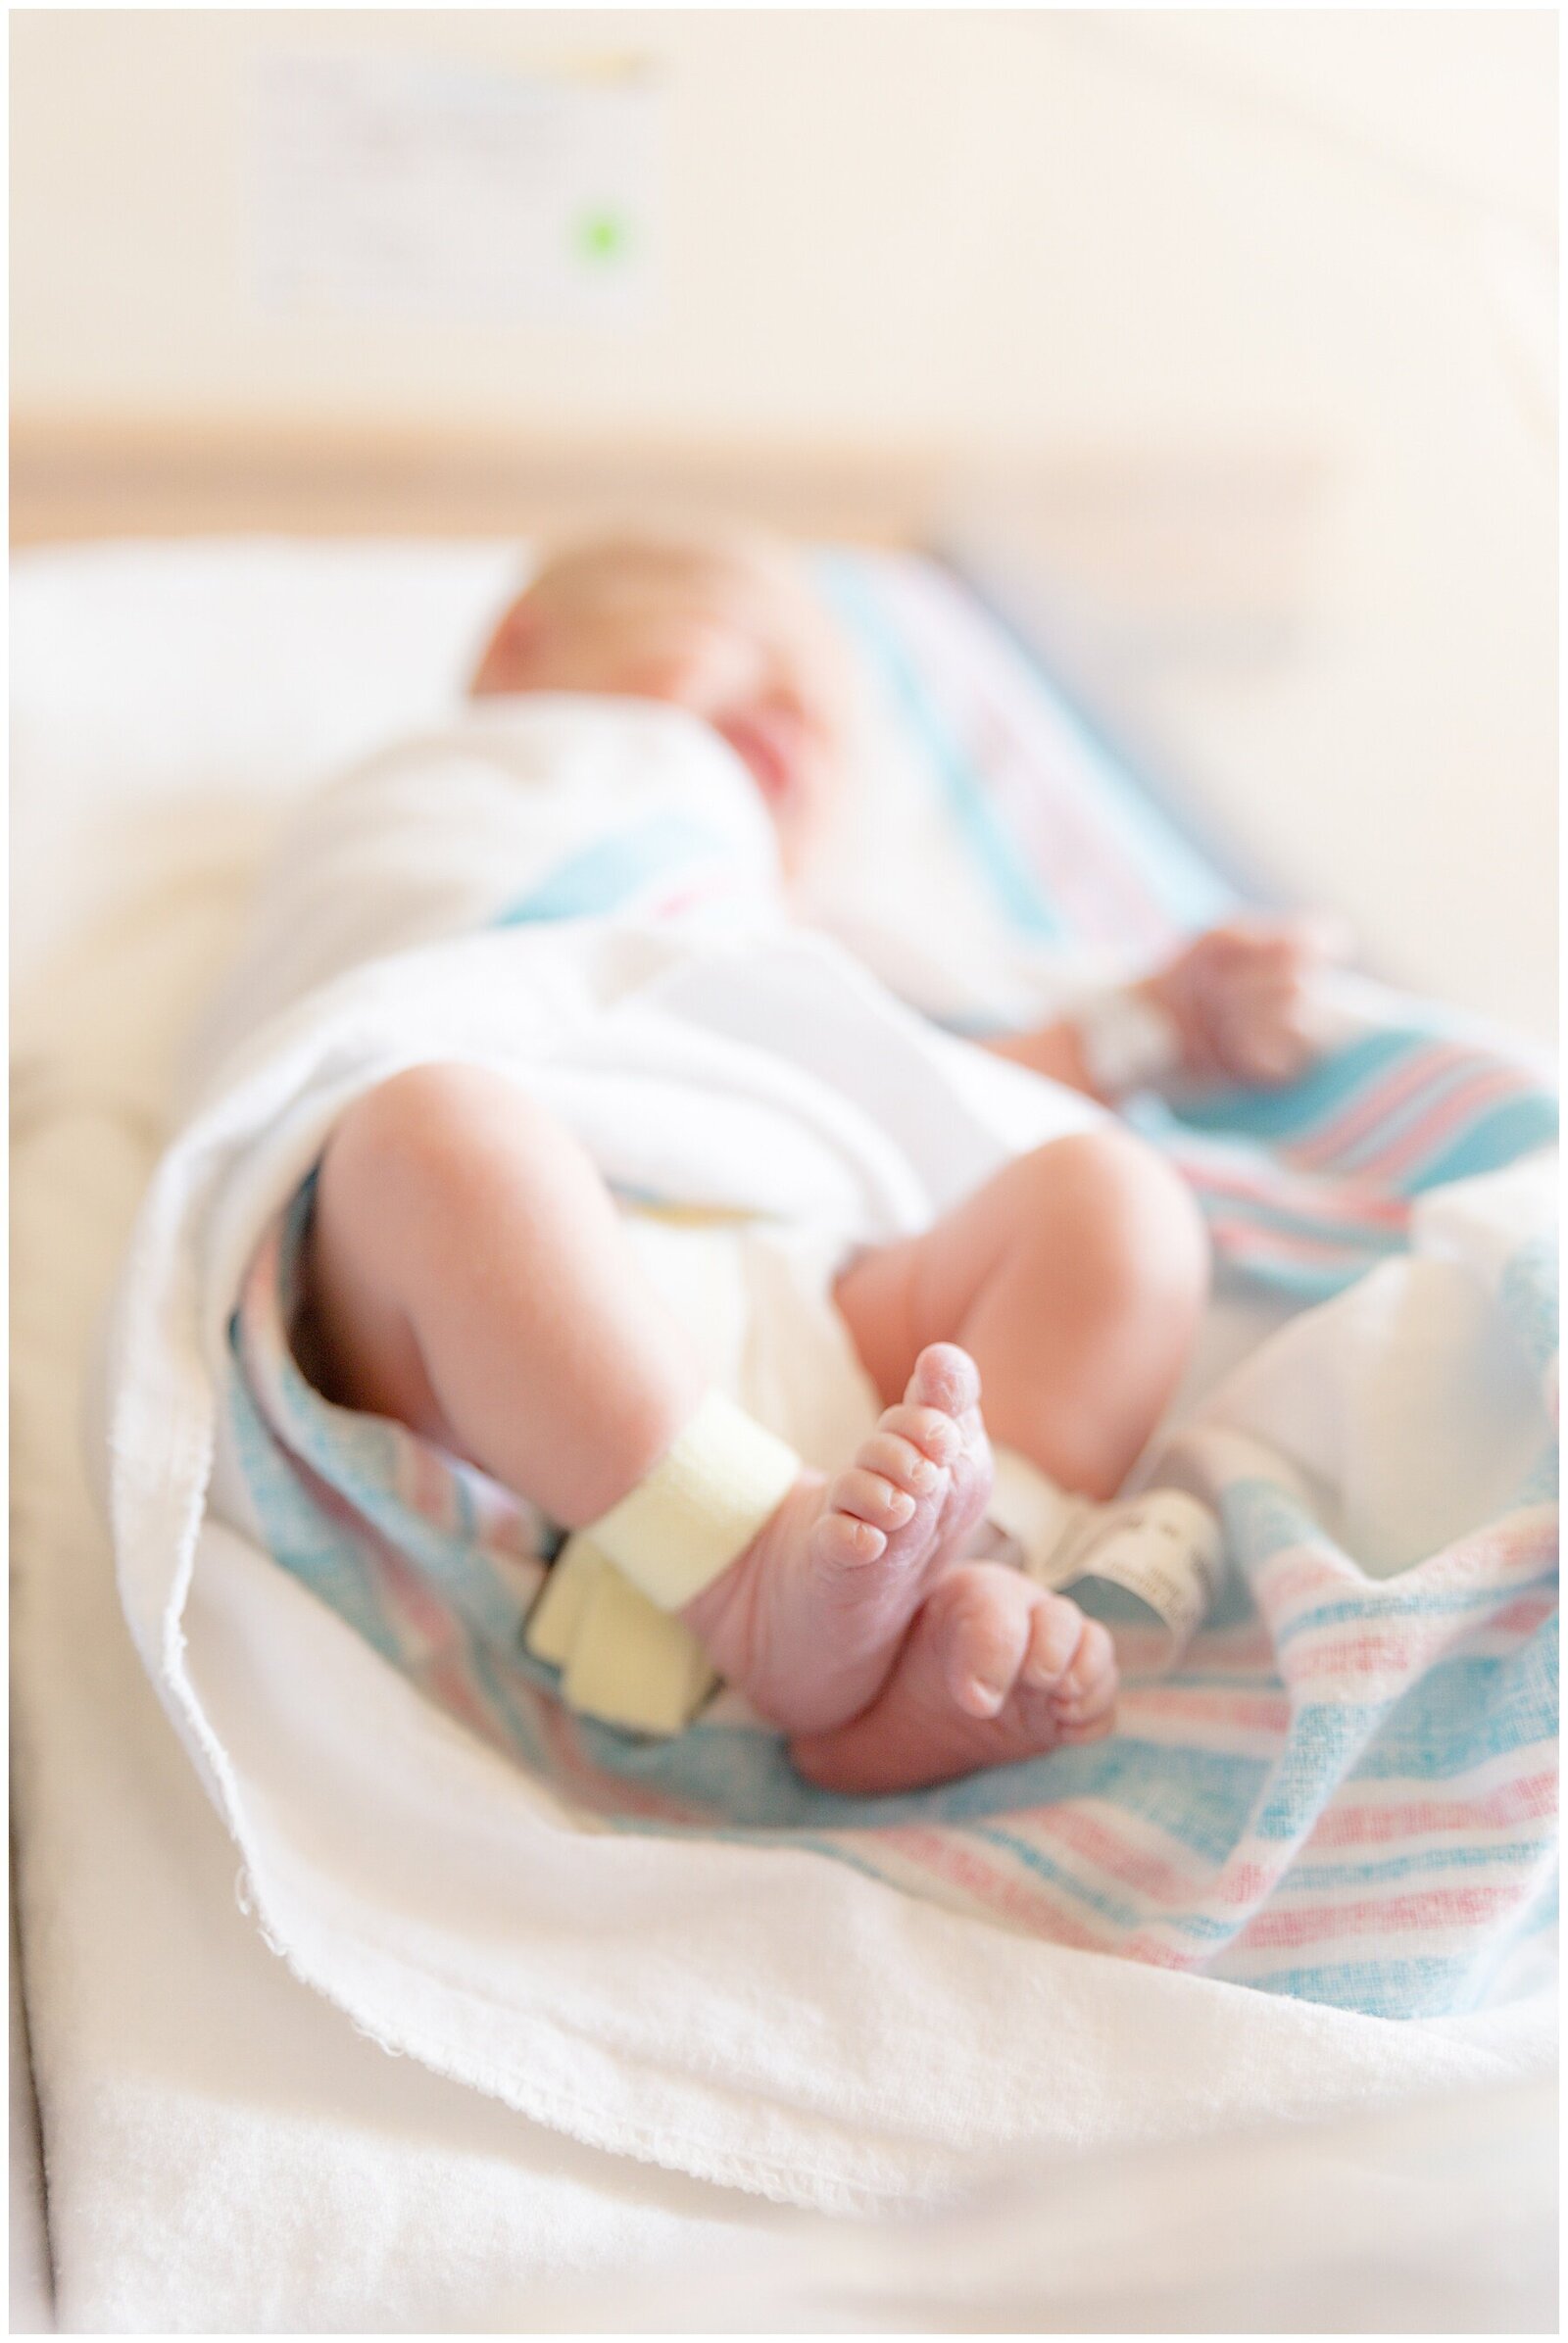 Documenting those tiny, precious little features of your newborn